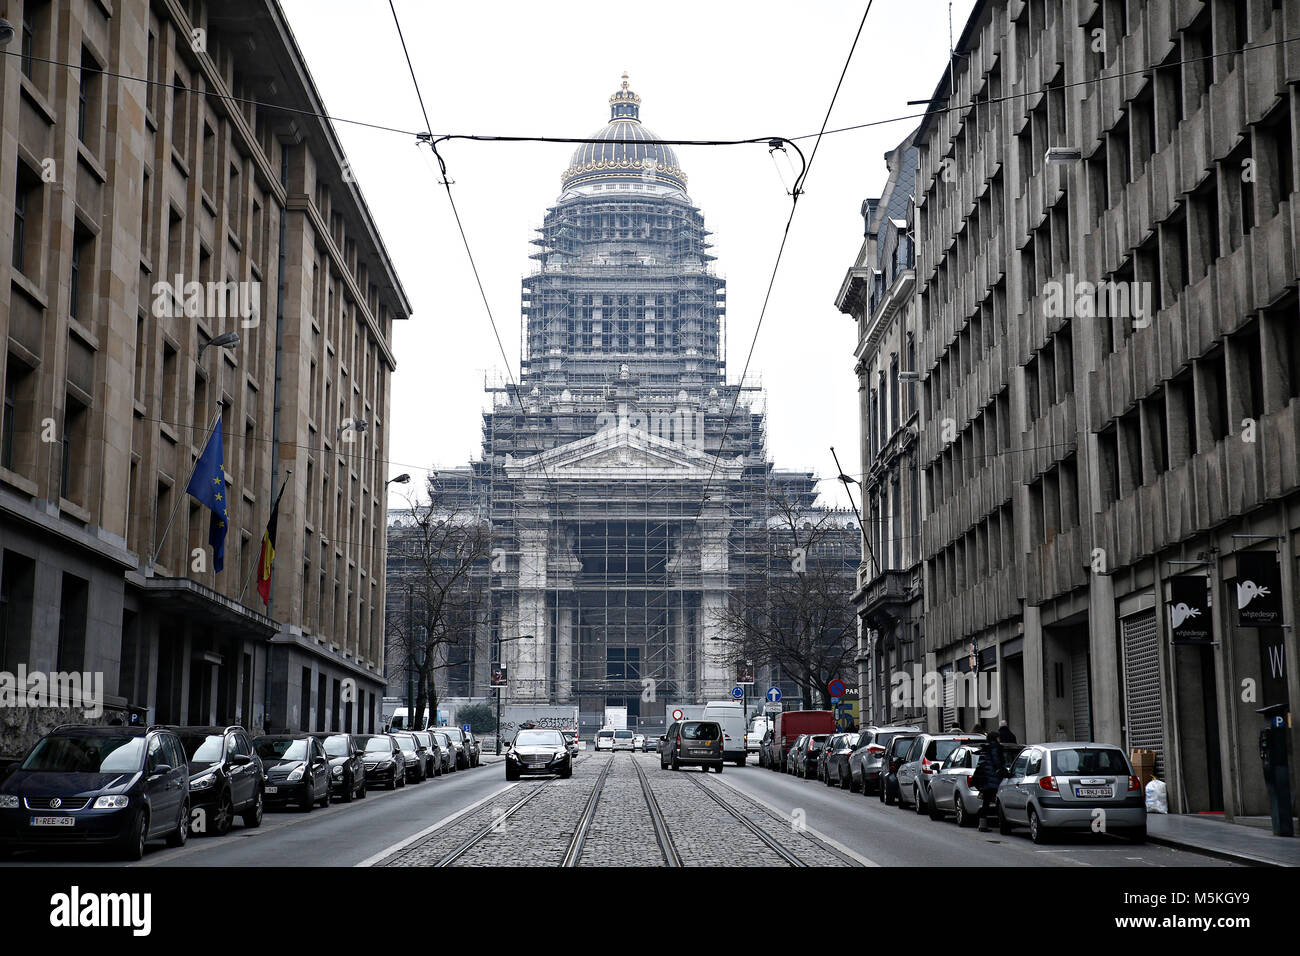 The Palace of Justice  or Law Courts of Brussels is the most important court building in Belgium. Stock Photo